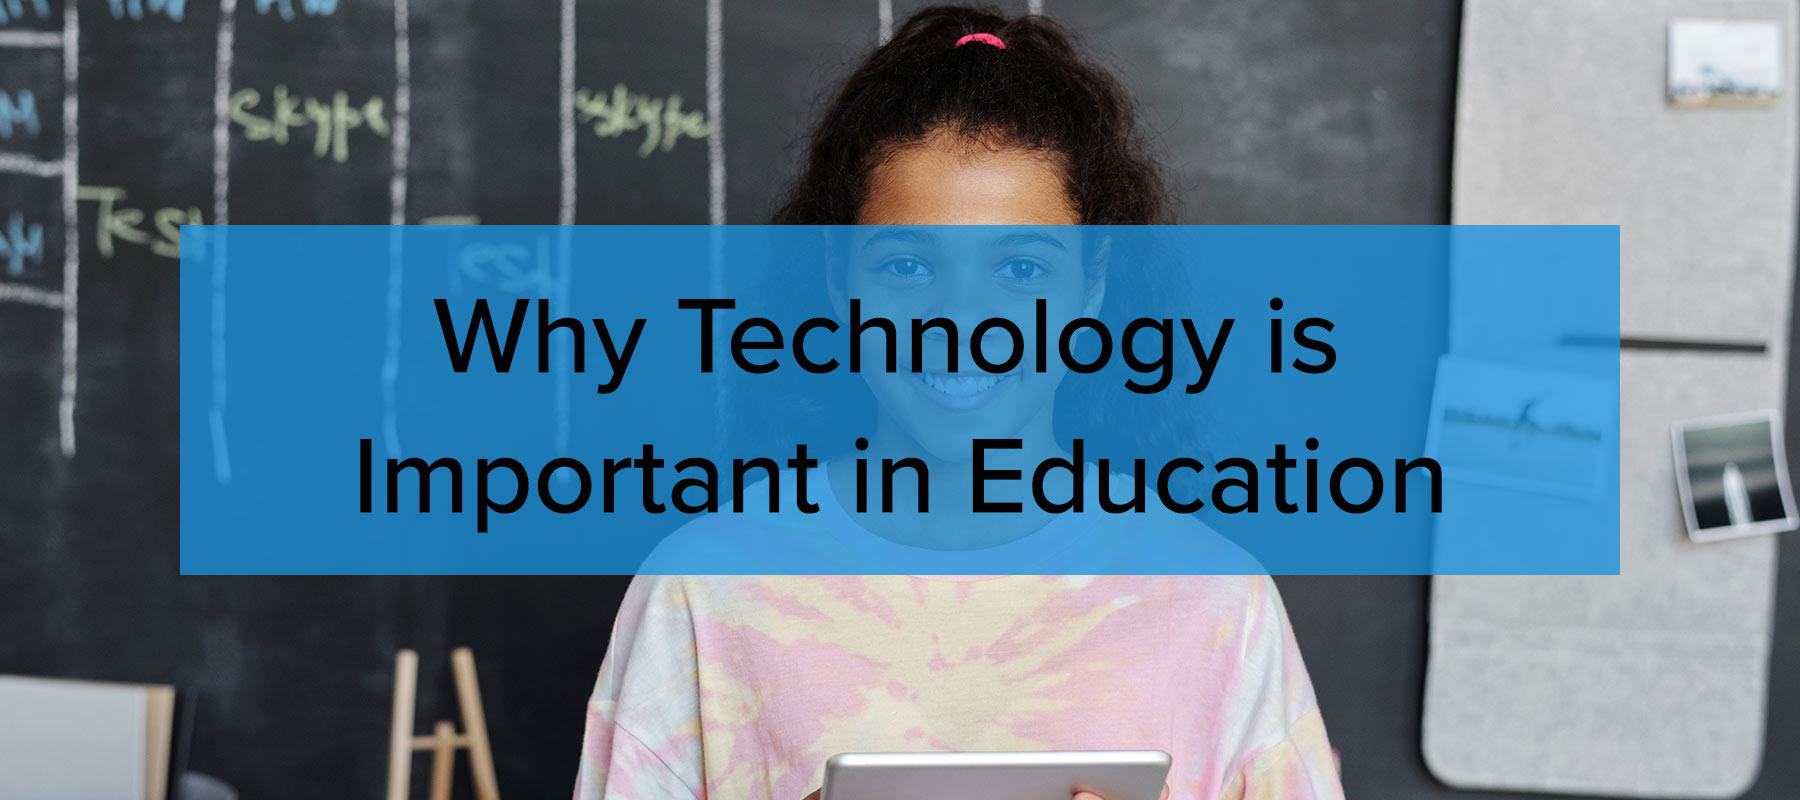 Why Technology is Important in Education